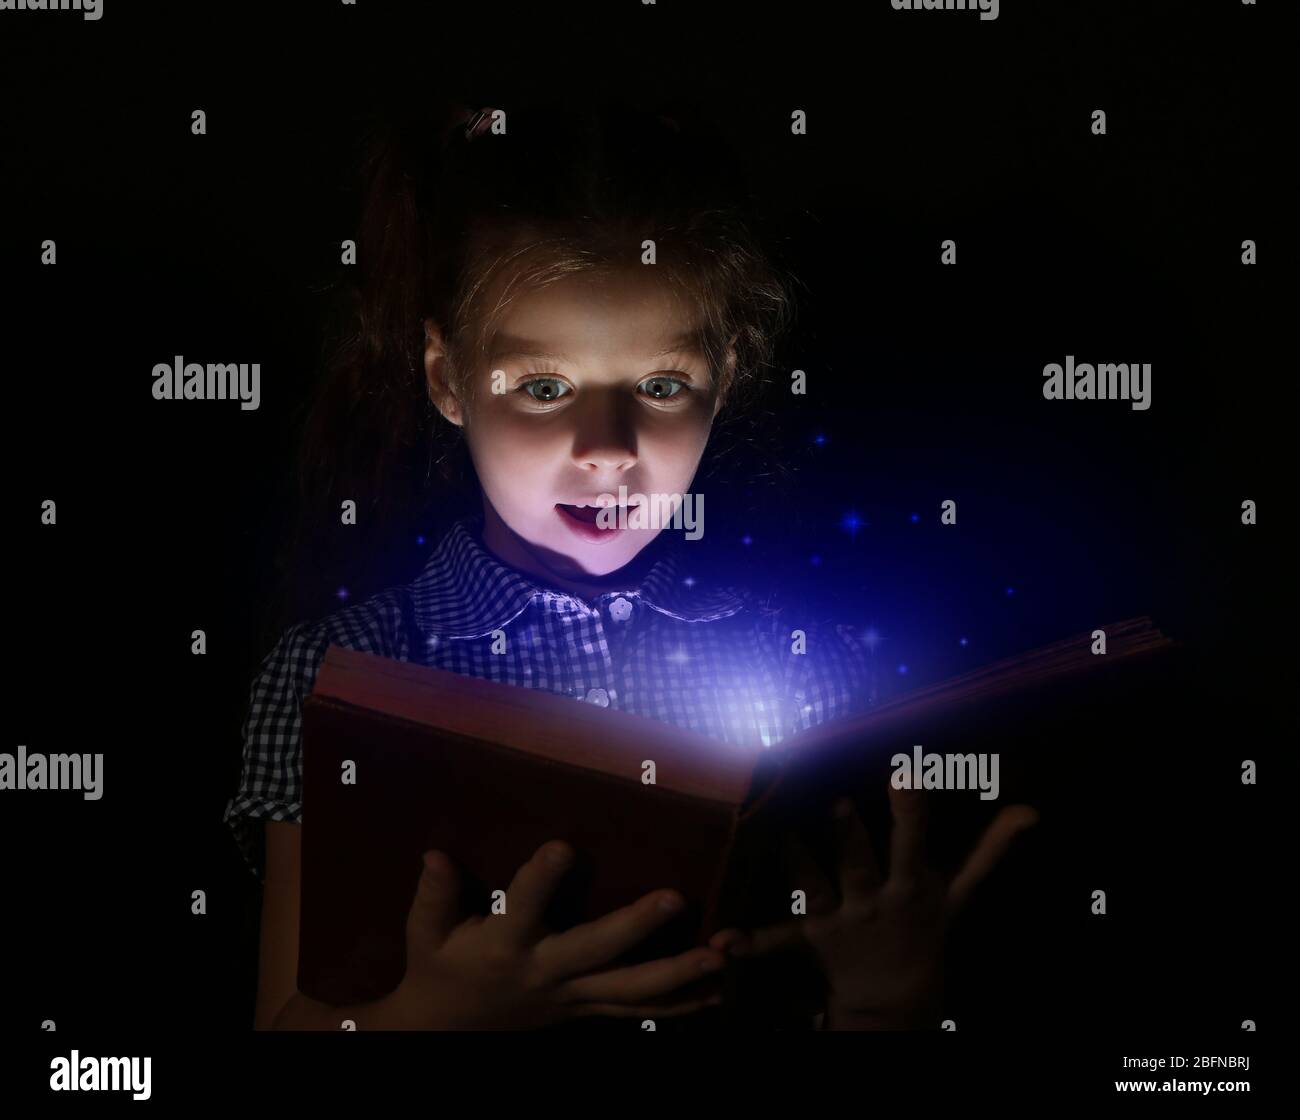 Cute girl reading book at night. Magic light coming out of book. Stock Photo